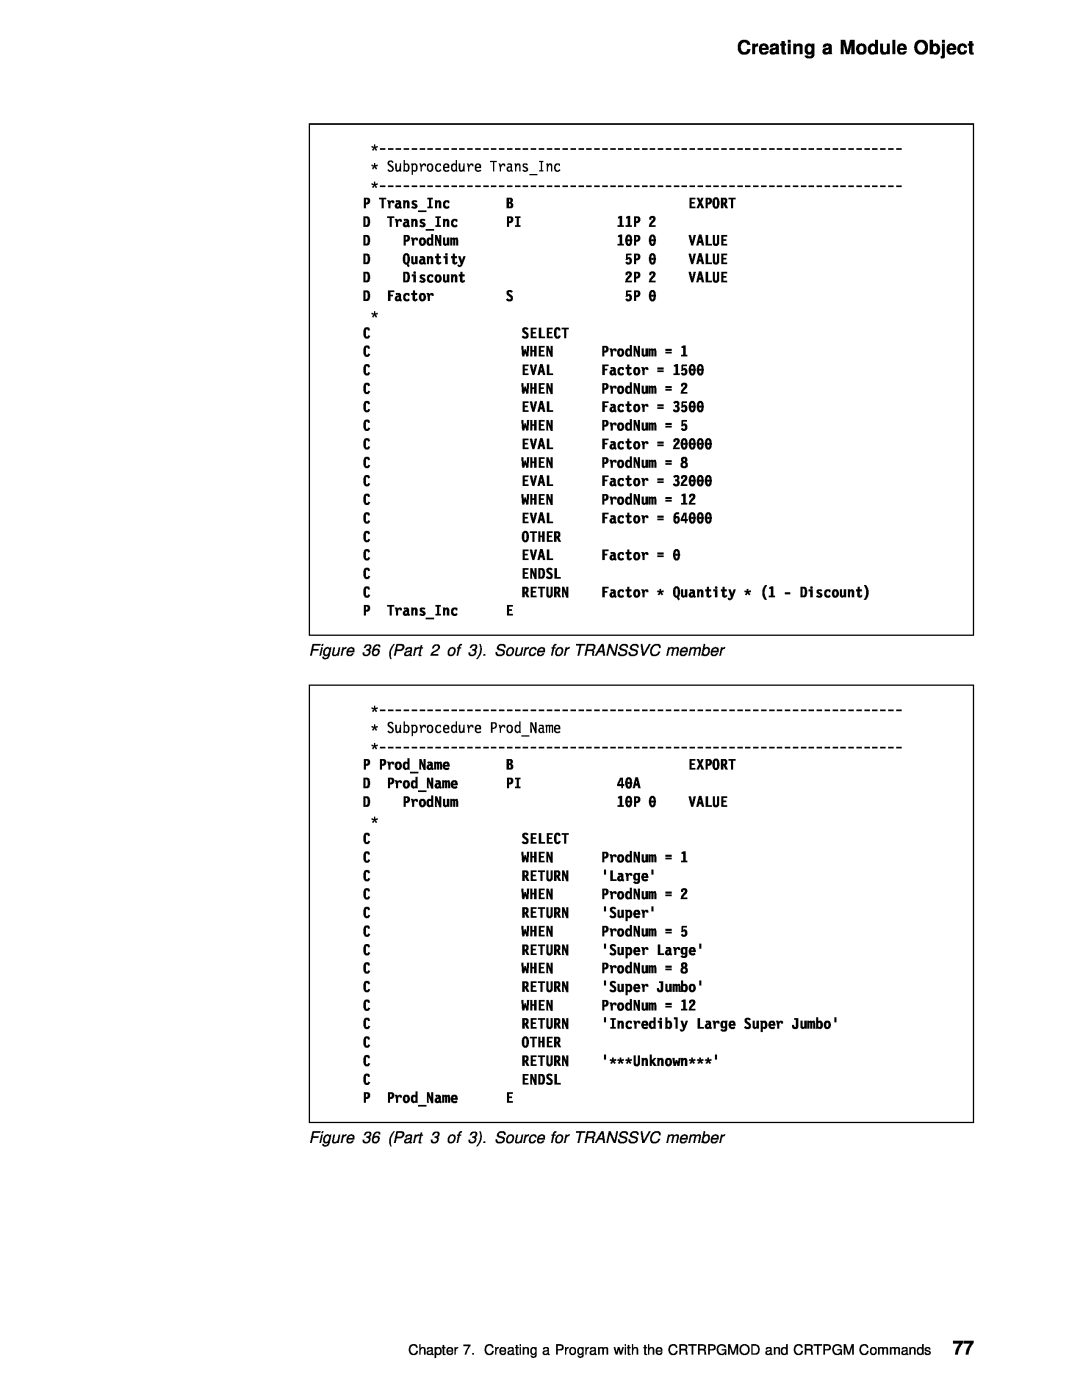 IBM AS/400 manual Creating a Module Object, Part, Source for TRANSSVC member 